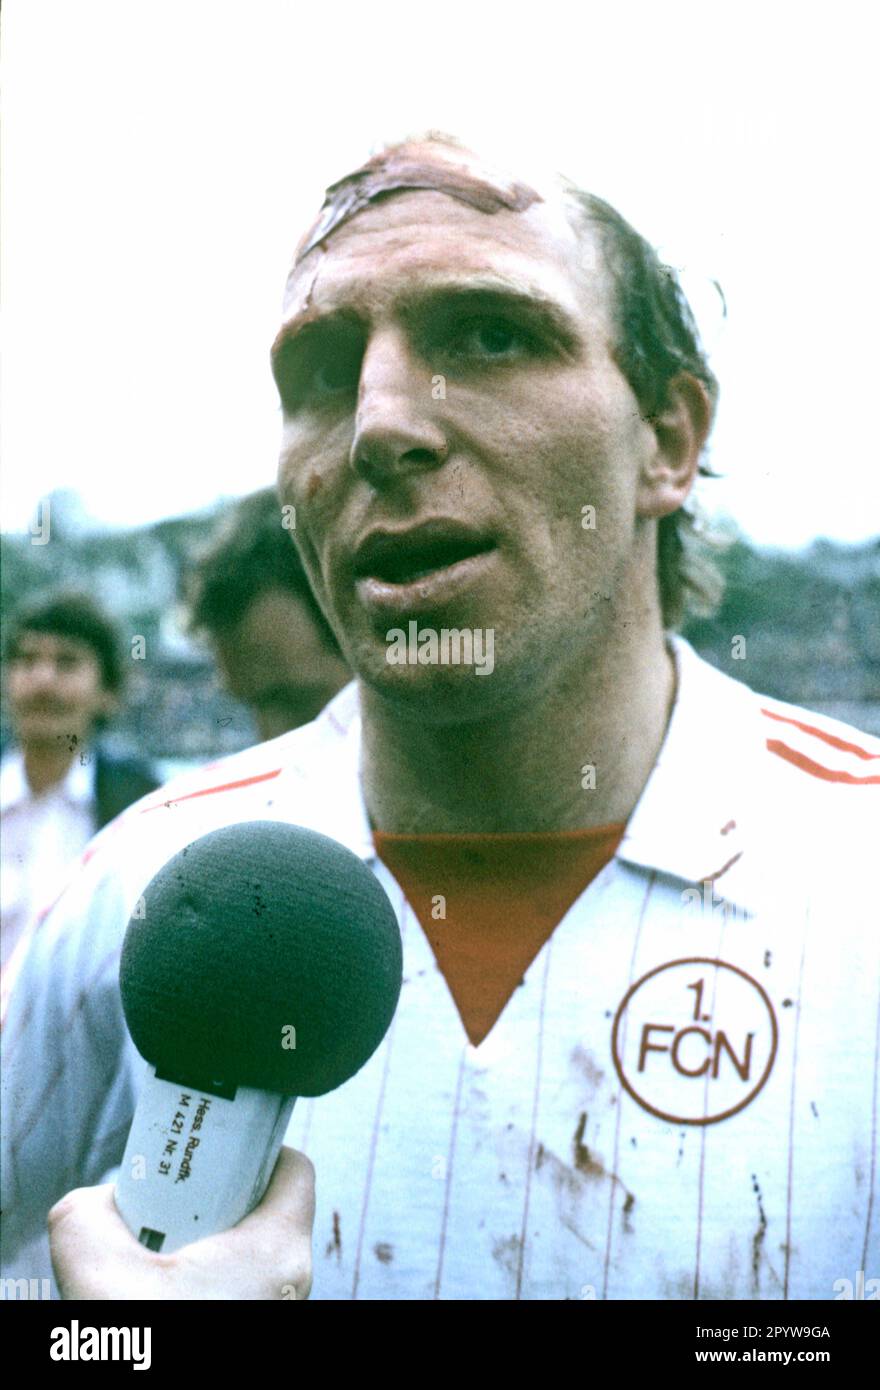 DFB Cup final FC Bayern Muenchen - 1. FC Nuernberg 4:2 /01.05.1982/ Dieter Hoeneß injured in the head in the jersey of Nuernberg gives an interview after the game [automated translation] Stock Photo